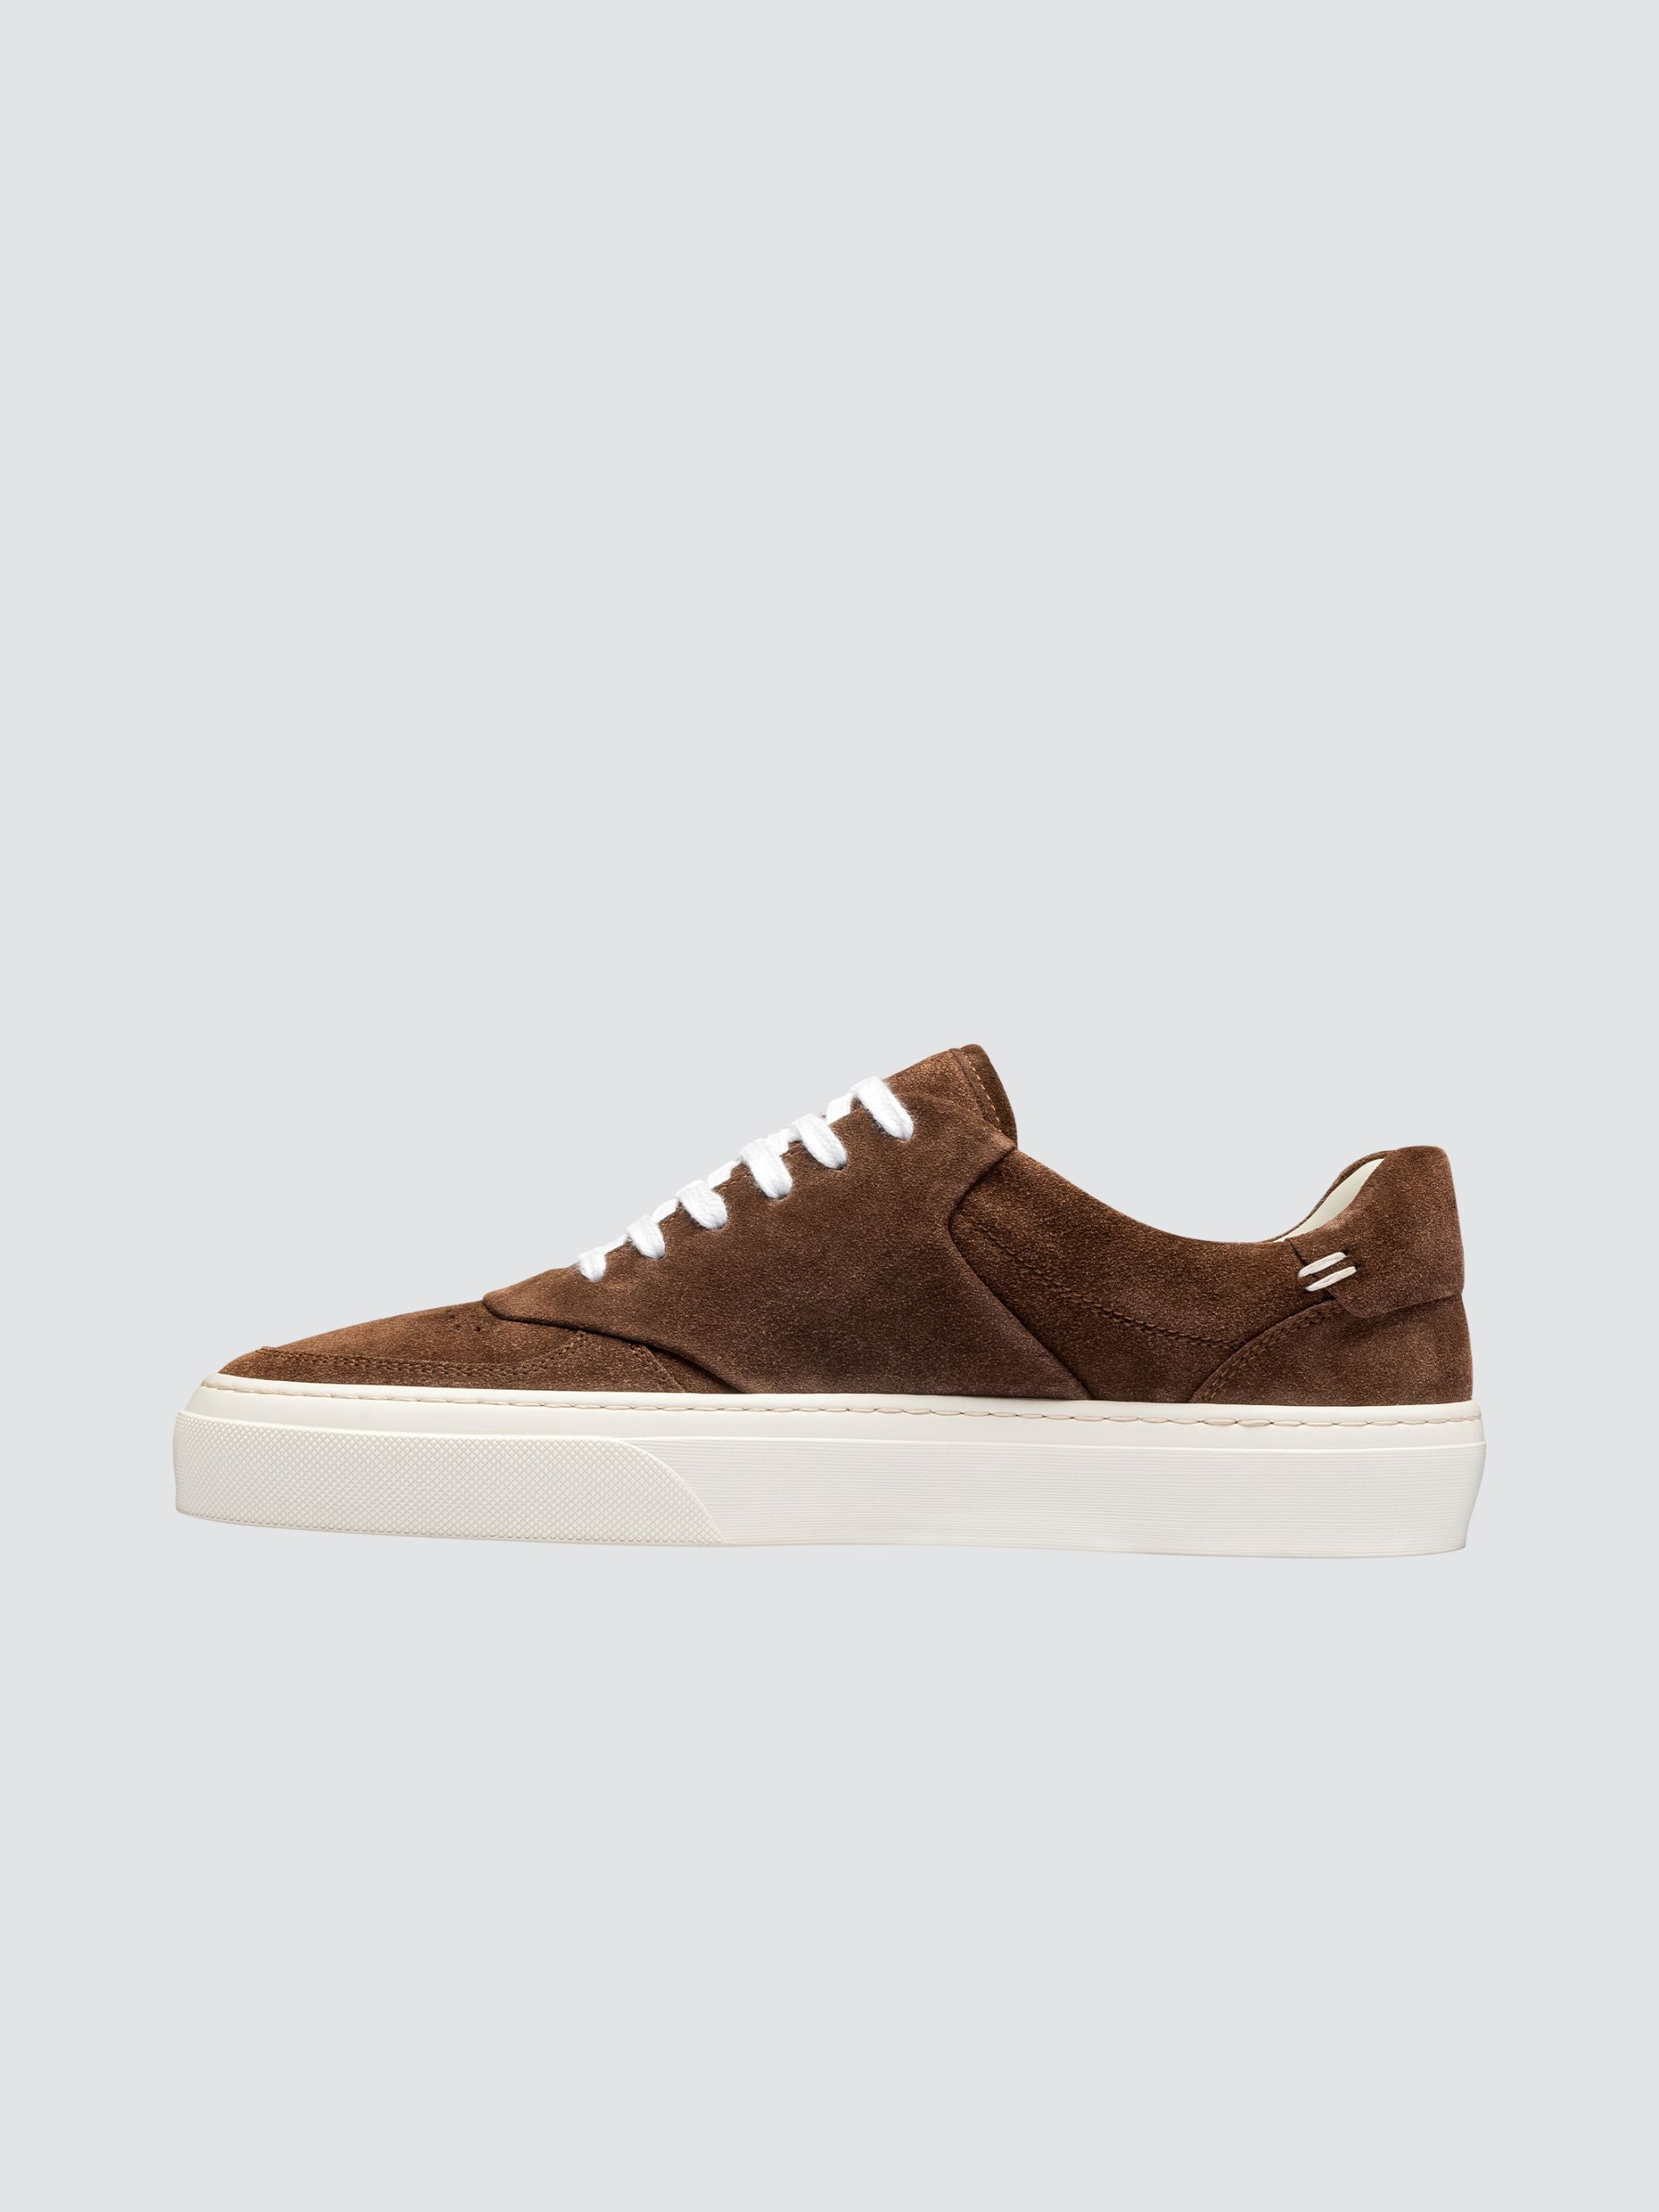 DREAMER BROWN SUEDE LEATHER SNEAKERS